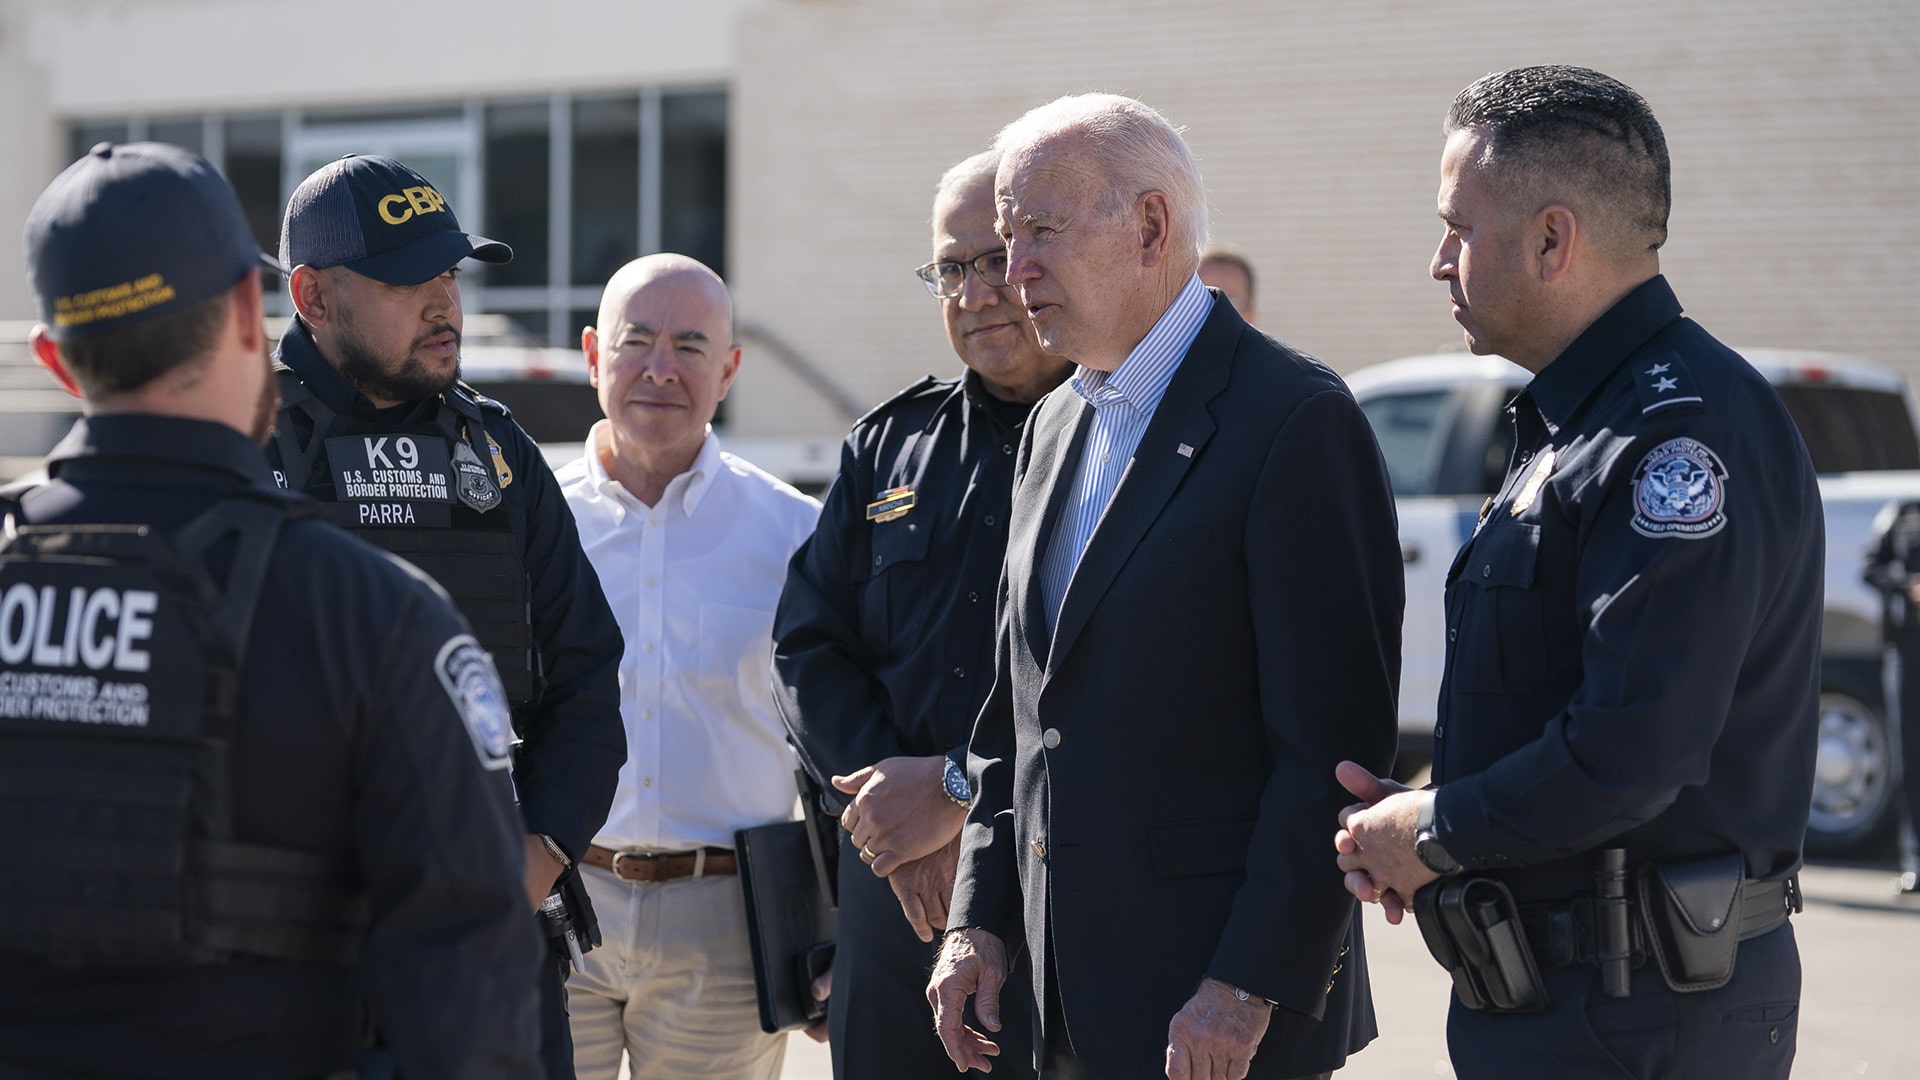 El Paso, Texas (January 8, 2023) Joe Biden receives a security briefing from US Customs and Border Protection Officers at the Bridge of the Americas Port of Entry in El Paso, Texas. Homeland Security Secretary Alejandro Mayorkas accompanied Biden during his visit to the US and Mexico border. (DHS photo by Tia Dufour)